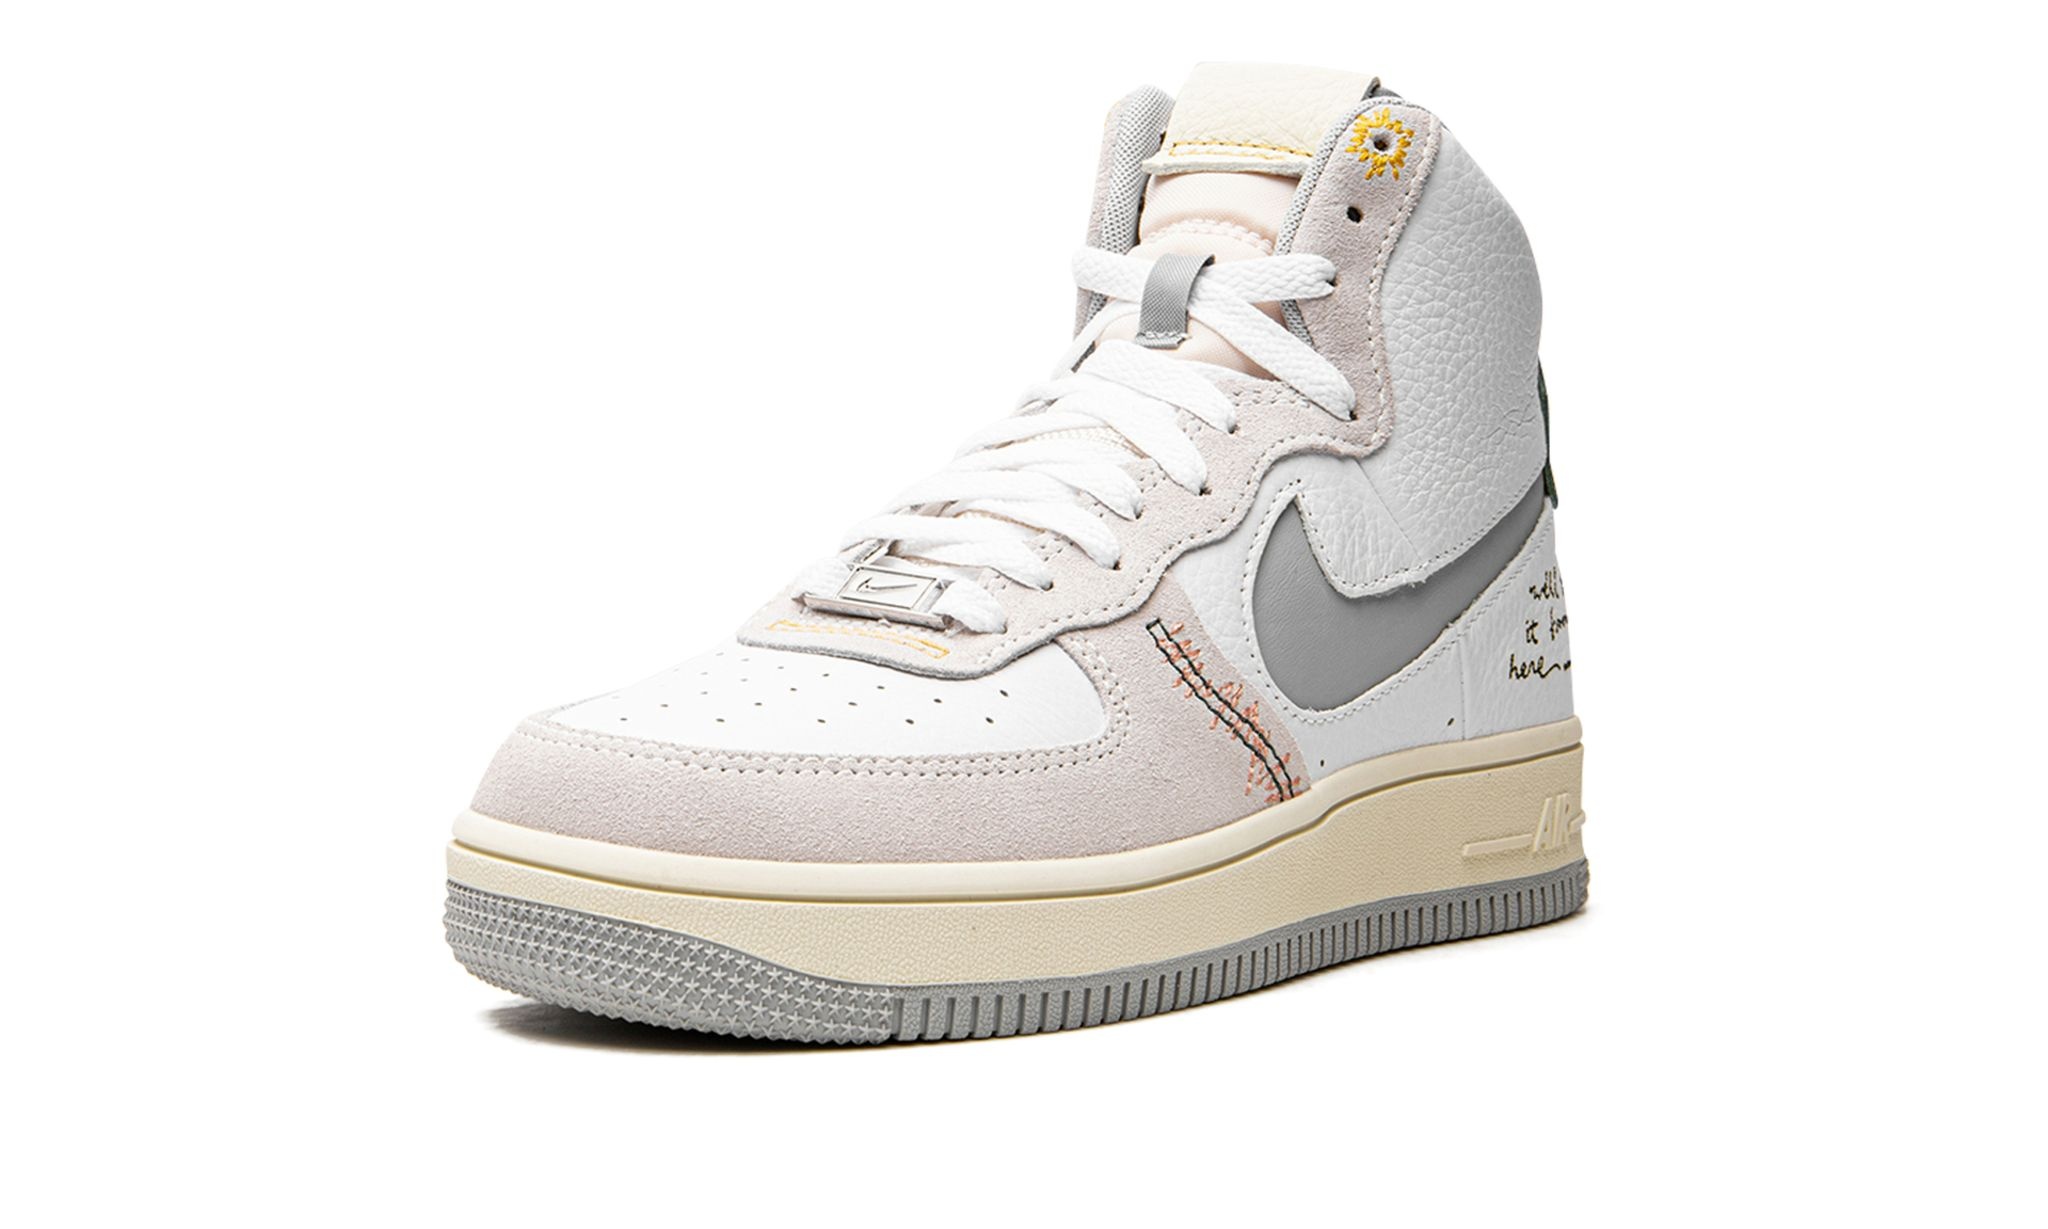 Nike Air Force 1 High Sculpt WMNS "We'll Take It From Here" - 4